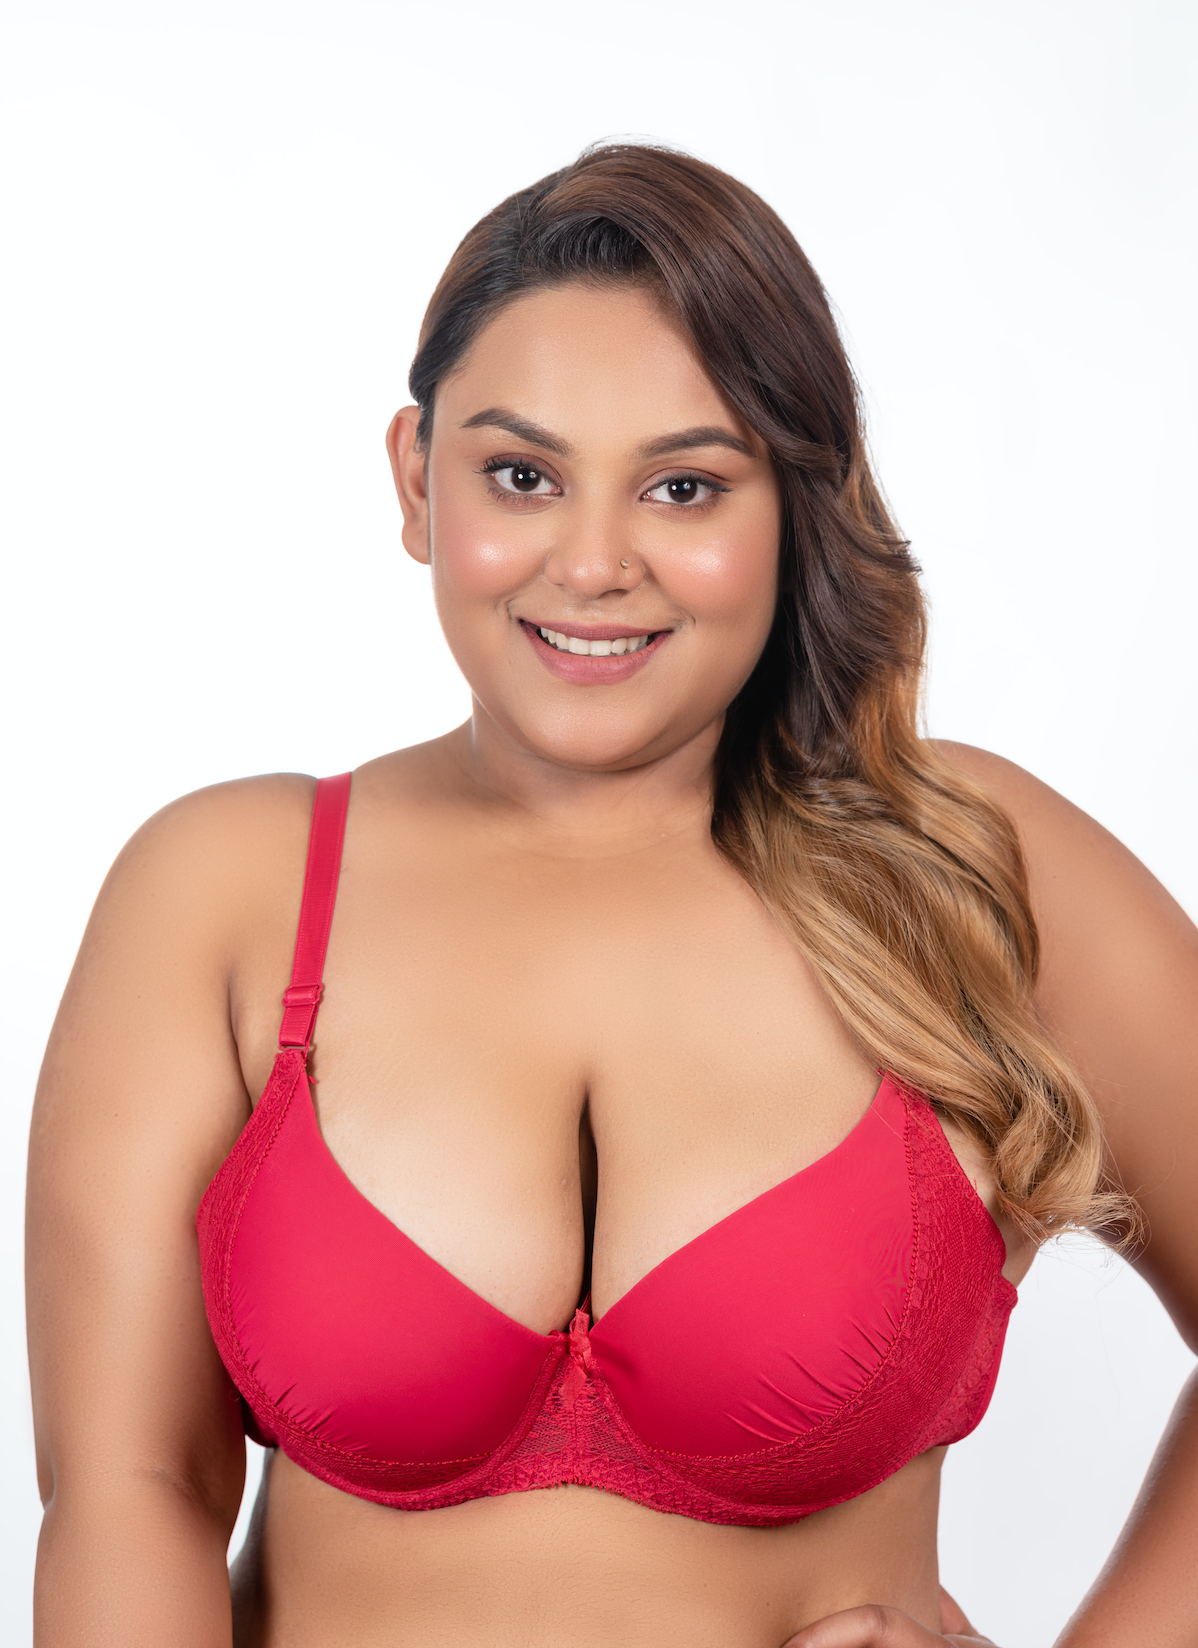 Generic Ybcg Push Up Bras For Women Thick Paddded Non-Slip